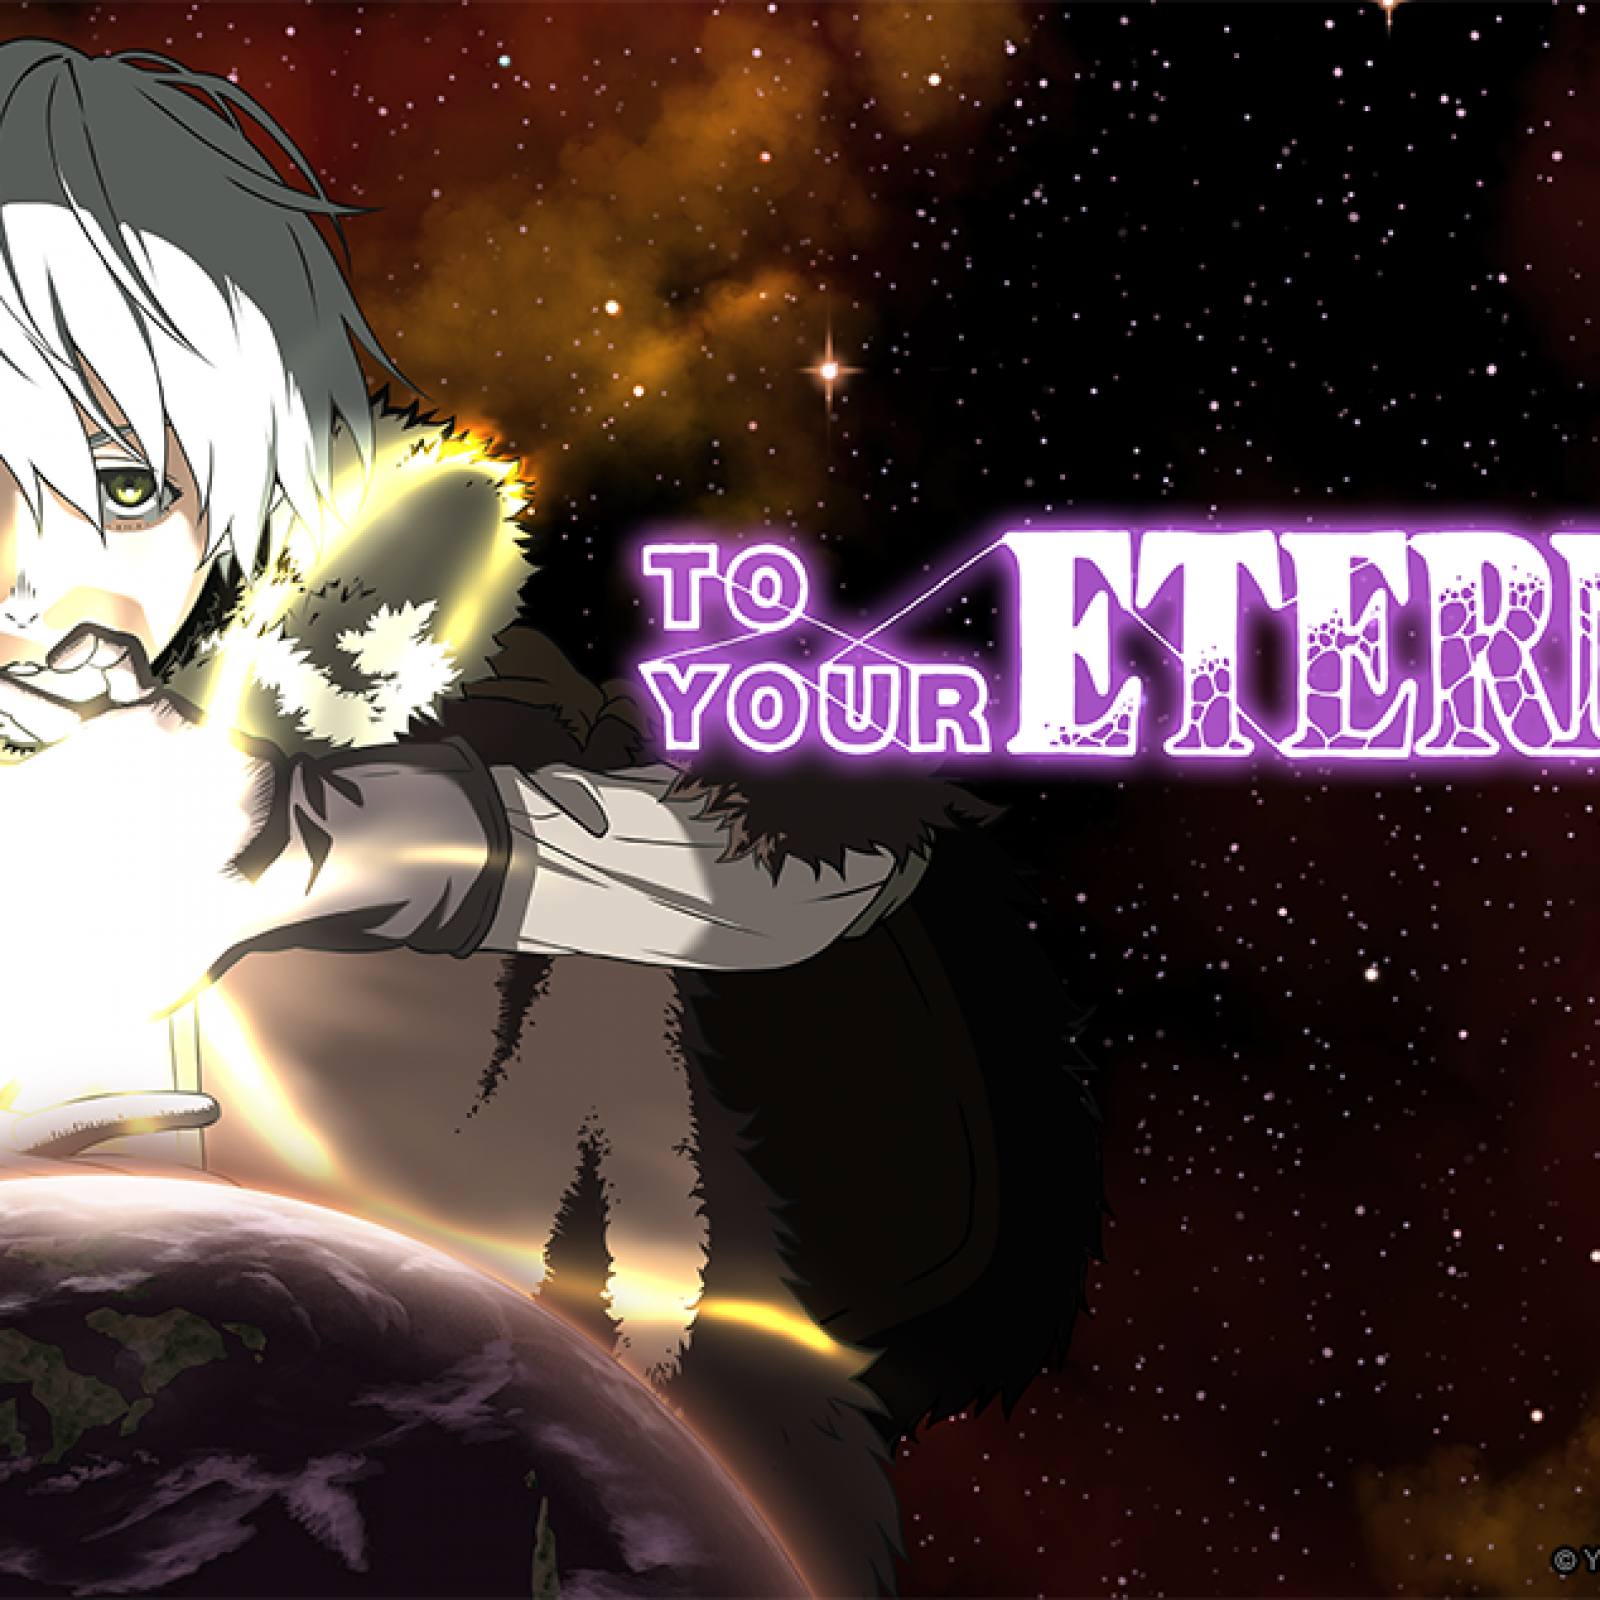 To Your Eternity Season 2 Episode 1 Release Date and Time on Crunchyroll -  GameRevolution